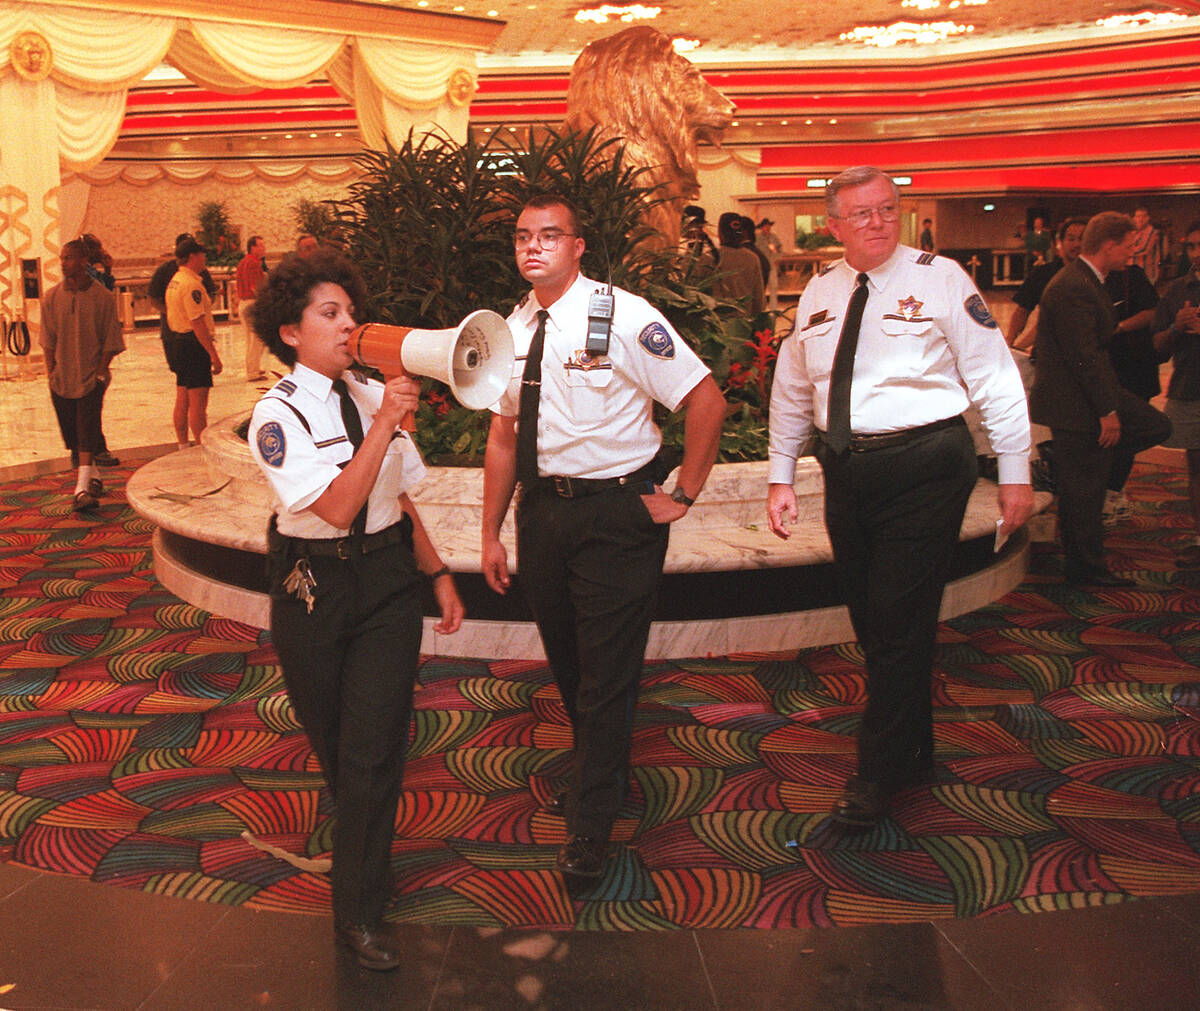 News 6 28 97 MGM Grand Hotel Security remove anyone who was not a registered guest Photo by Cli ...